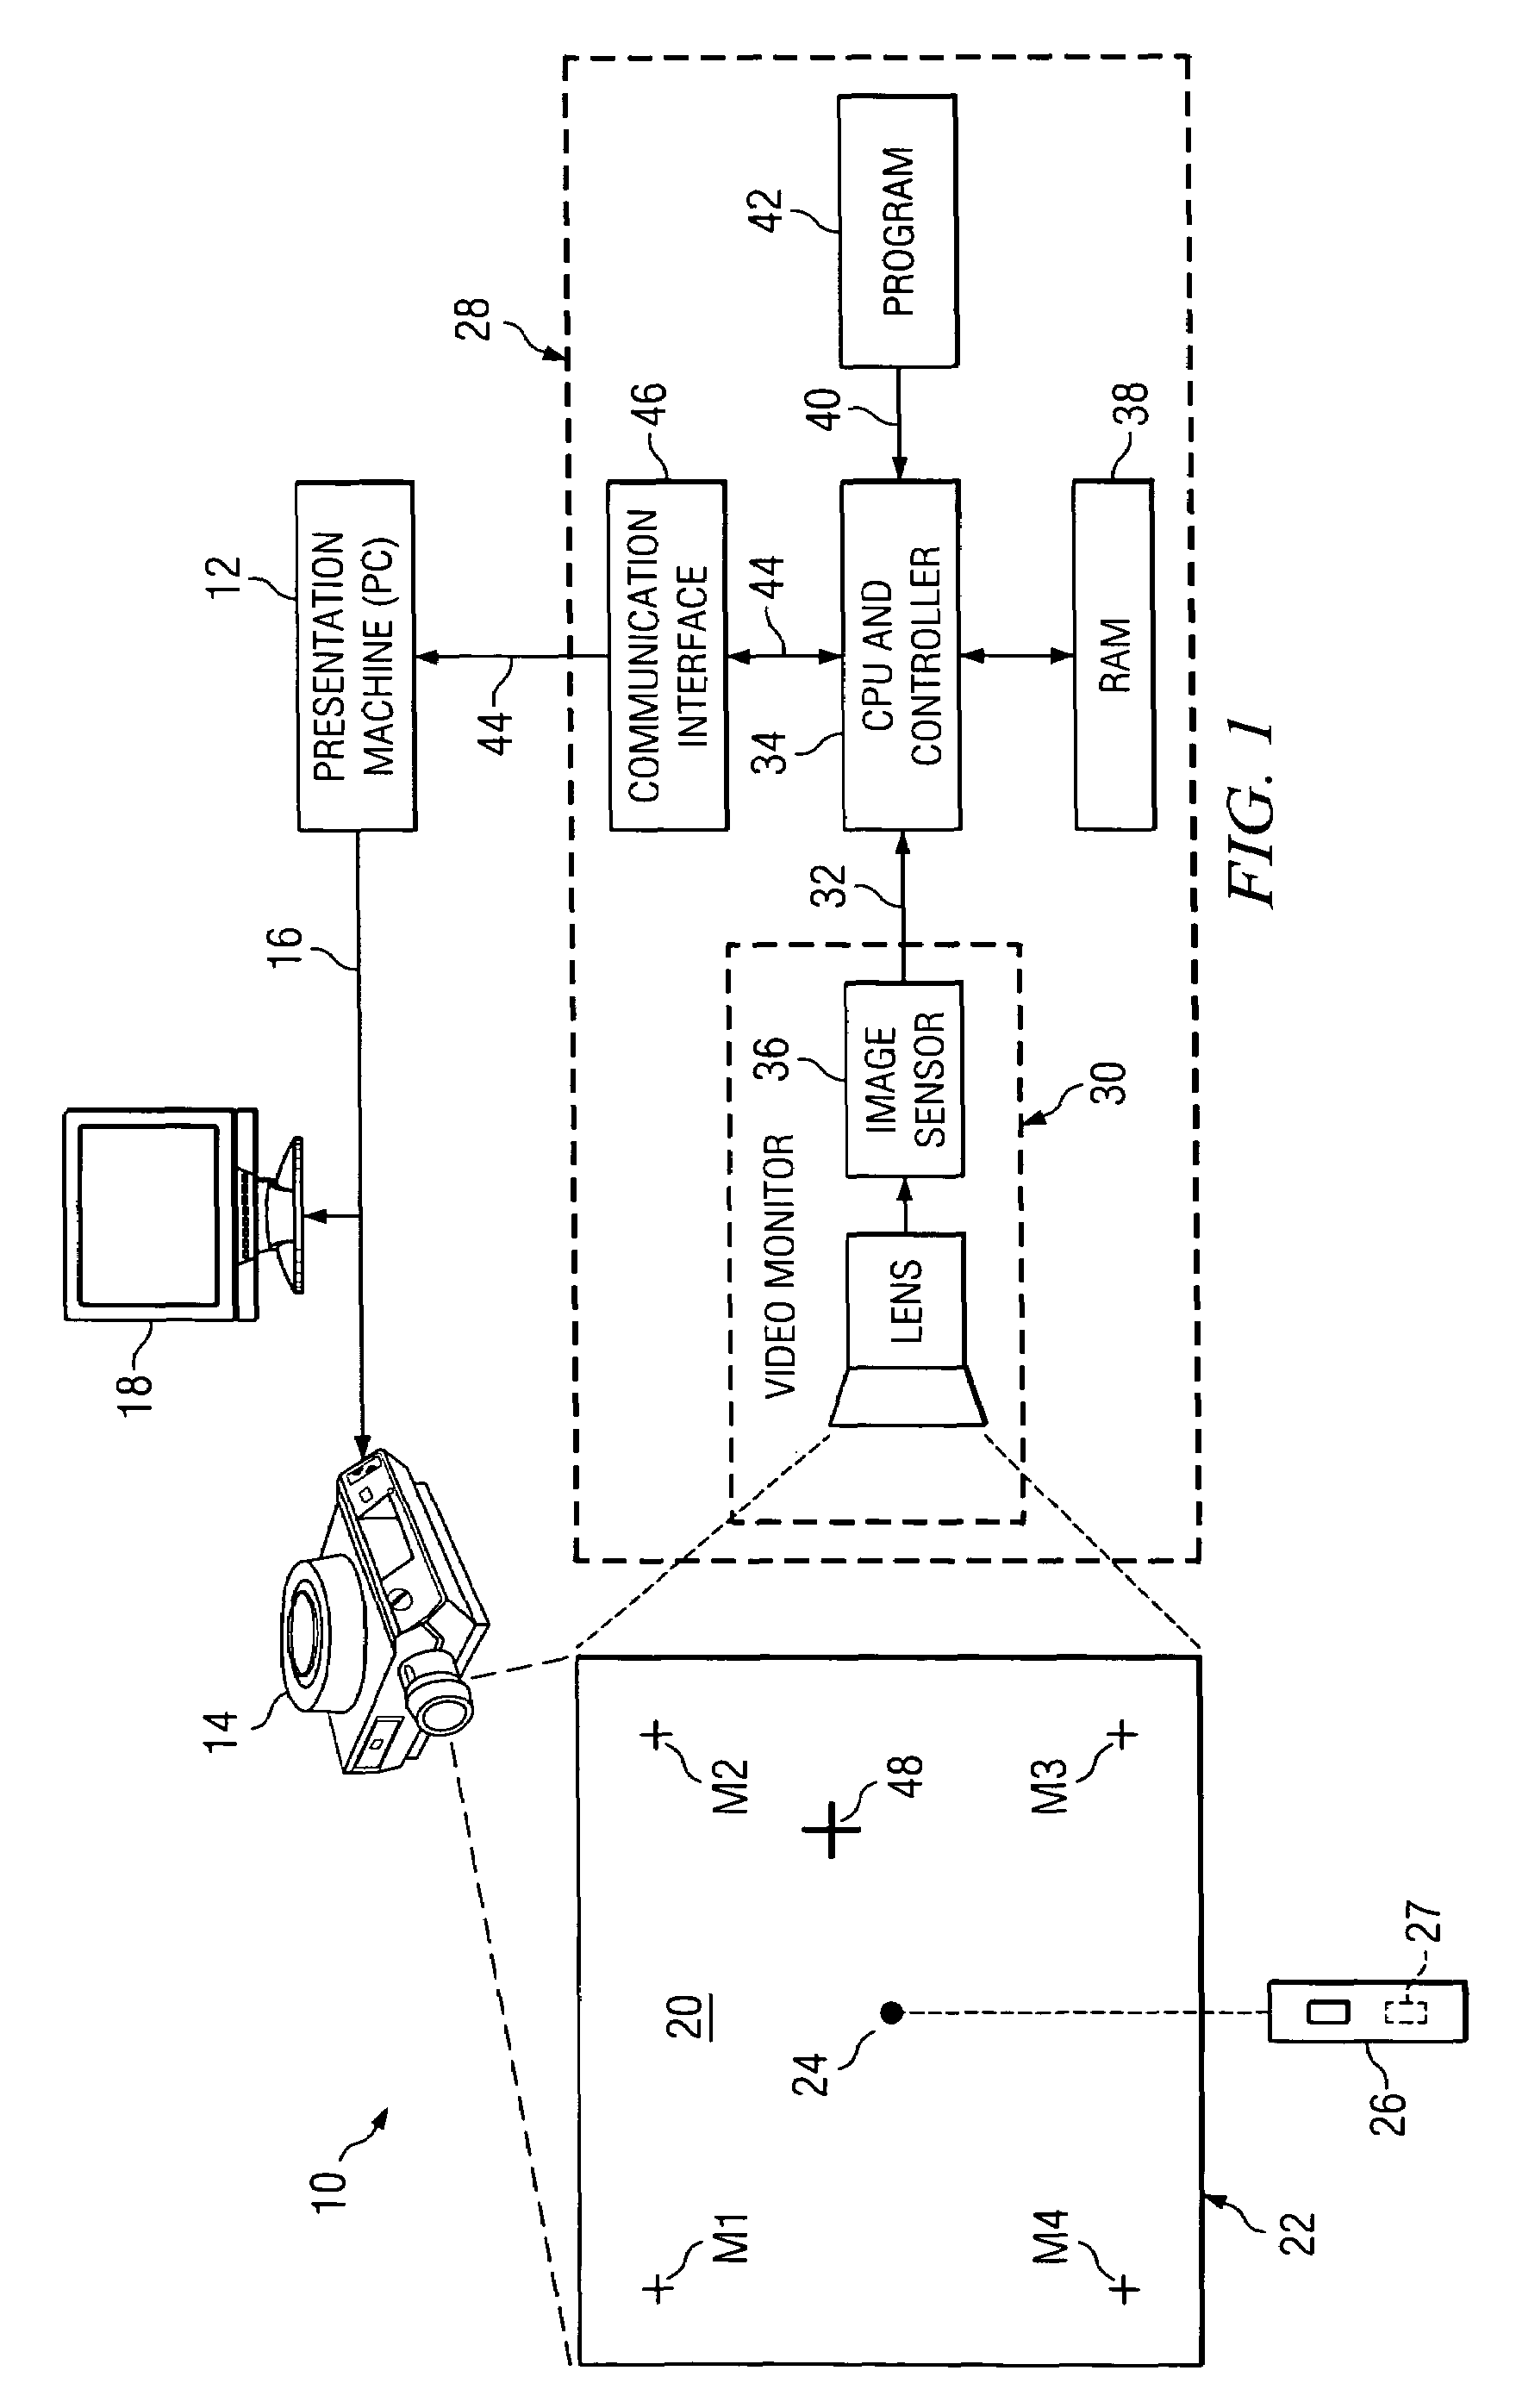 Visual input pointing device for interactive display system